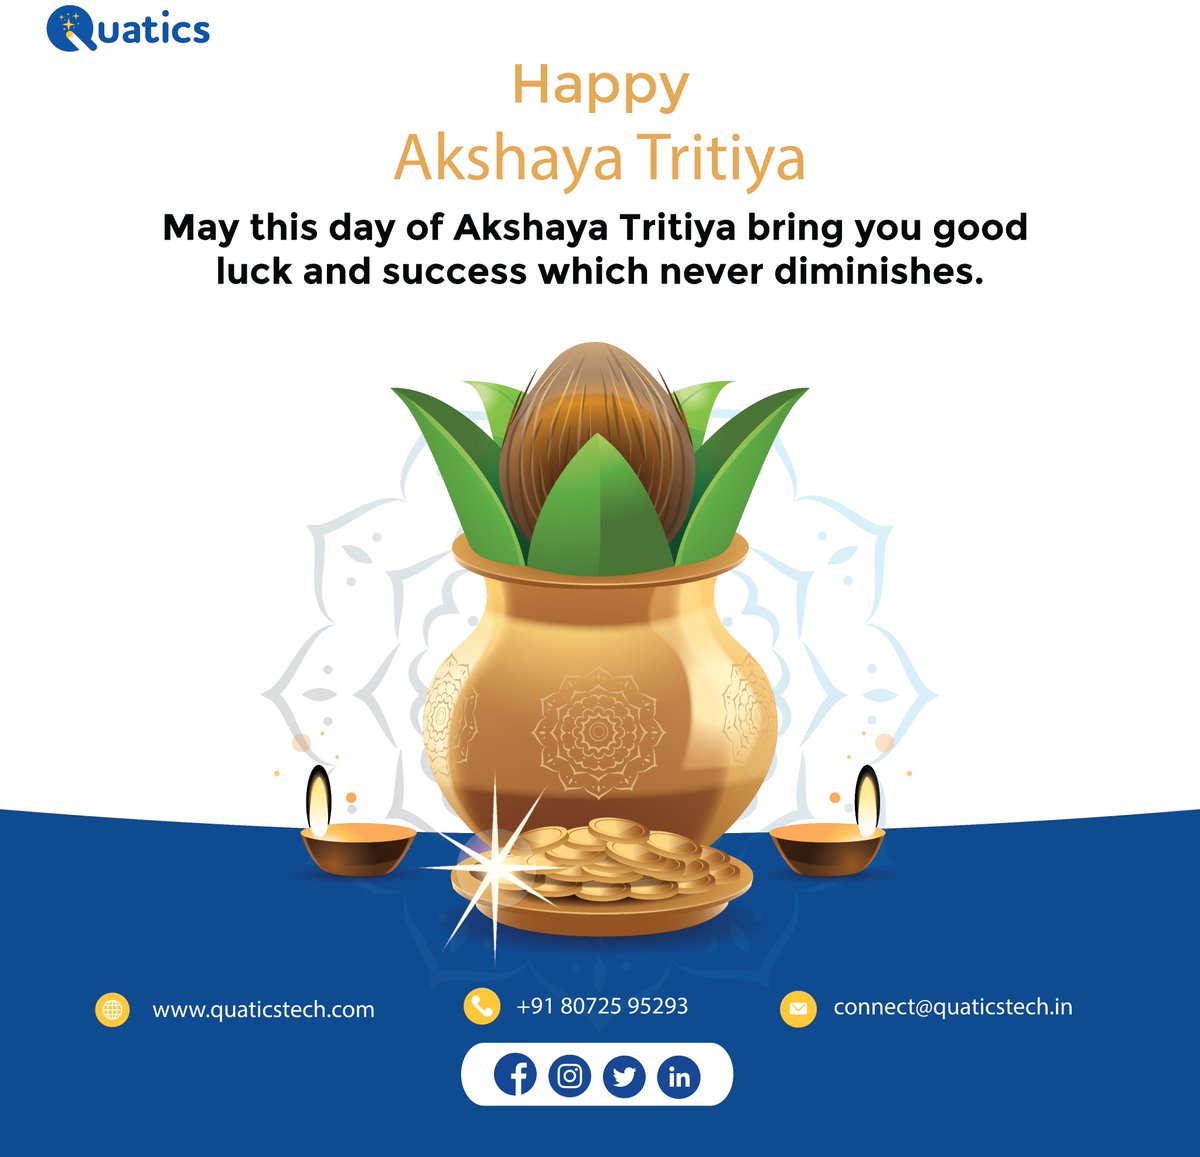 Start something new on this #Akshaya Tritiya!🤗.
We are here to help you!
DM for Free consultation
Call - +91 80725 95293
Website - quaticstech.com
Email - connect@quaticstech.in 
#webdevelopment #appdevelopment #softwaredevelopment #cloudcomputing #cloudprogramming